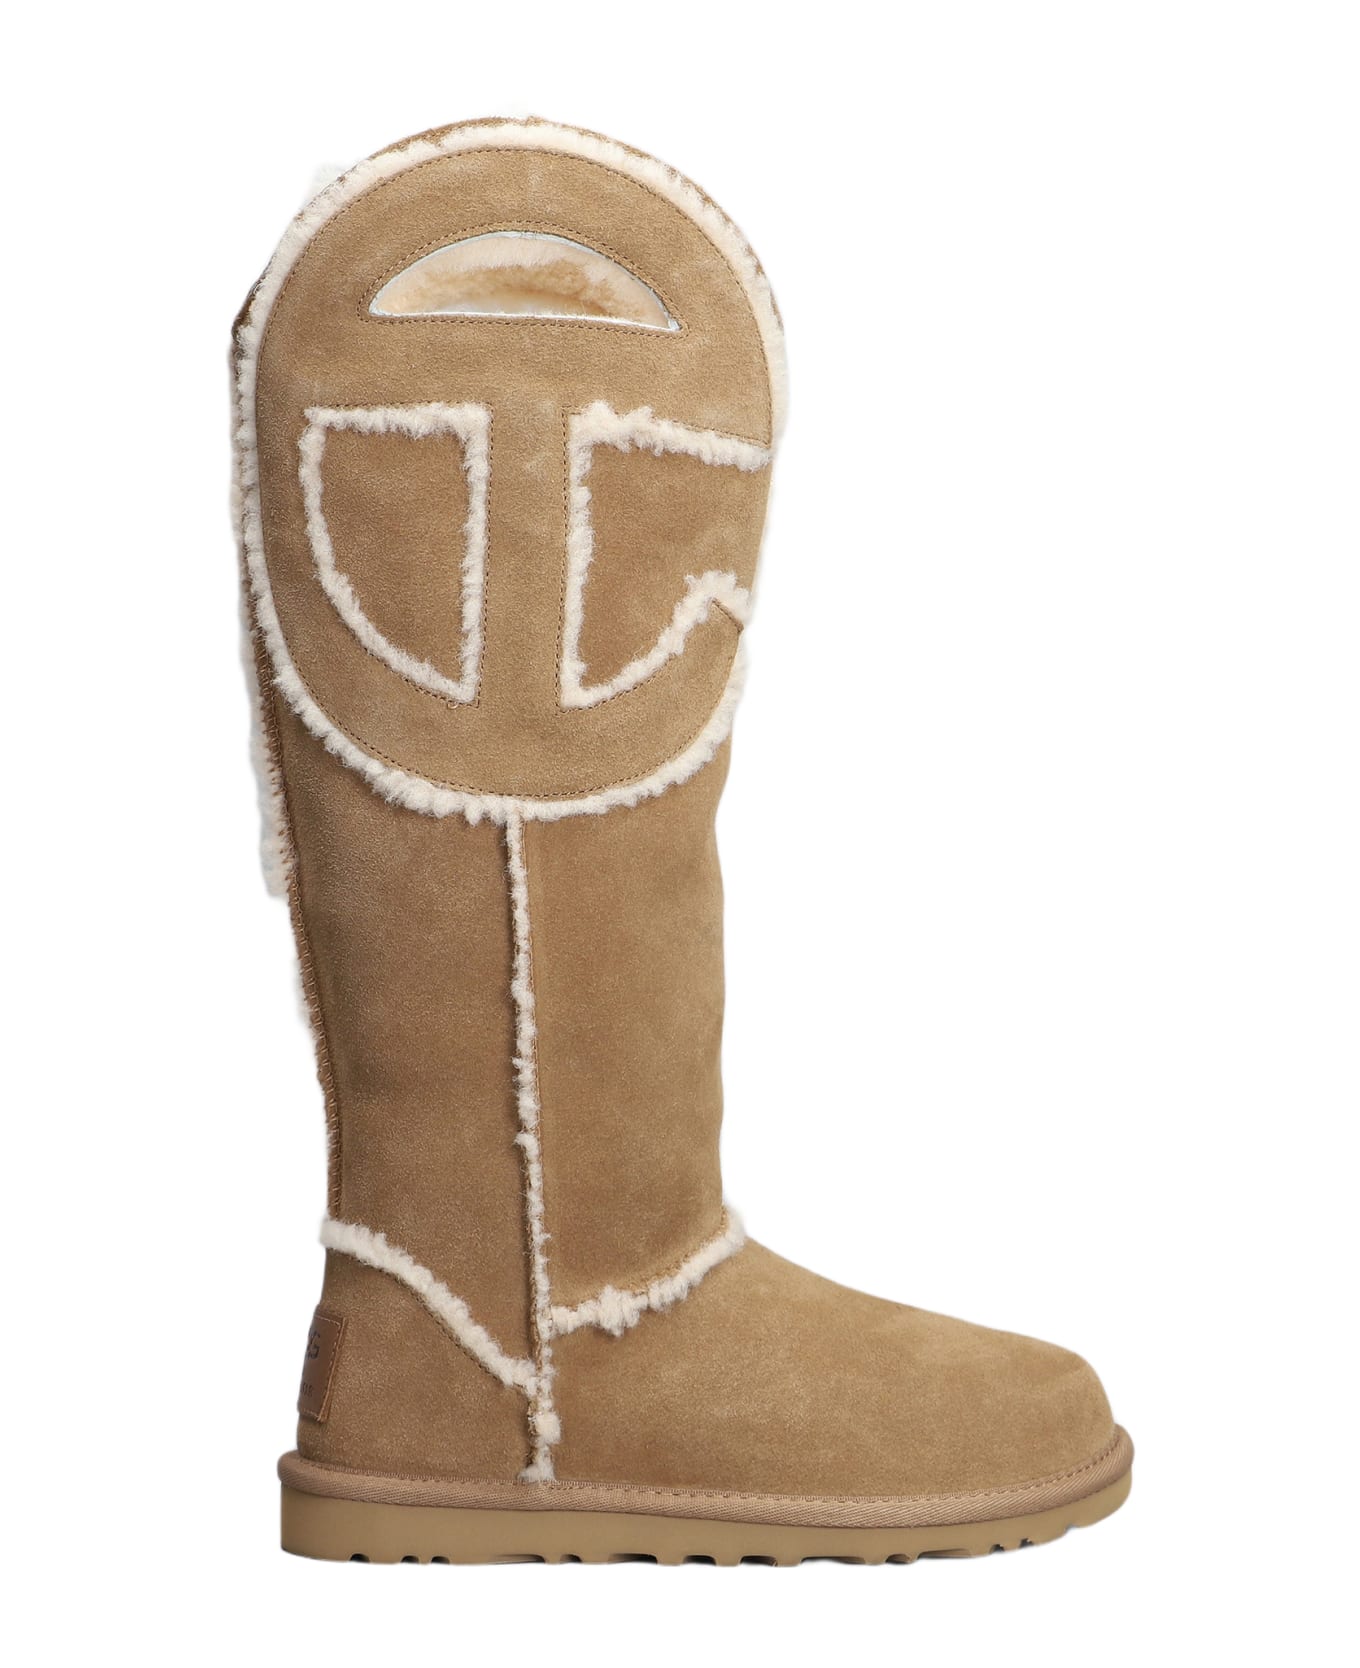 UGG Logo Tall Boot Low Heels Boots In Leather Color Suede - Brown ブーツ